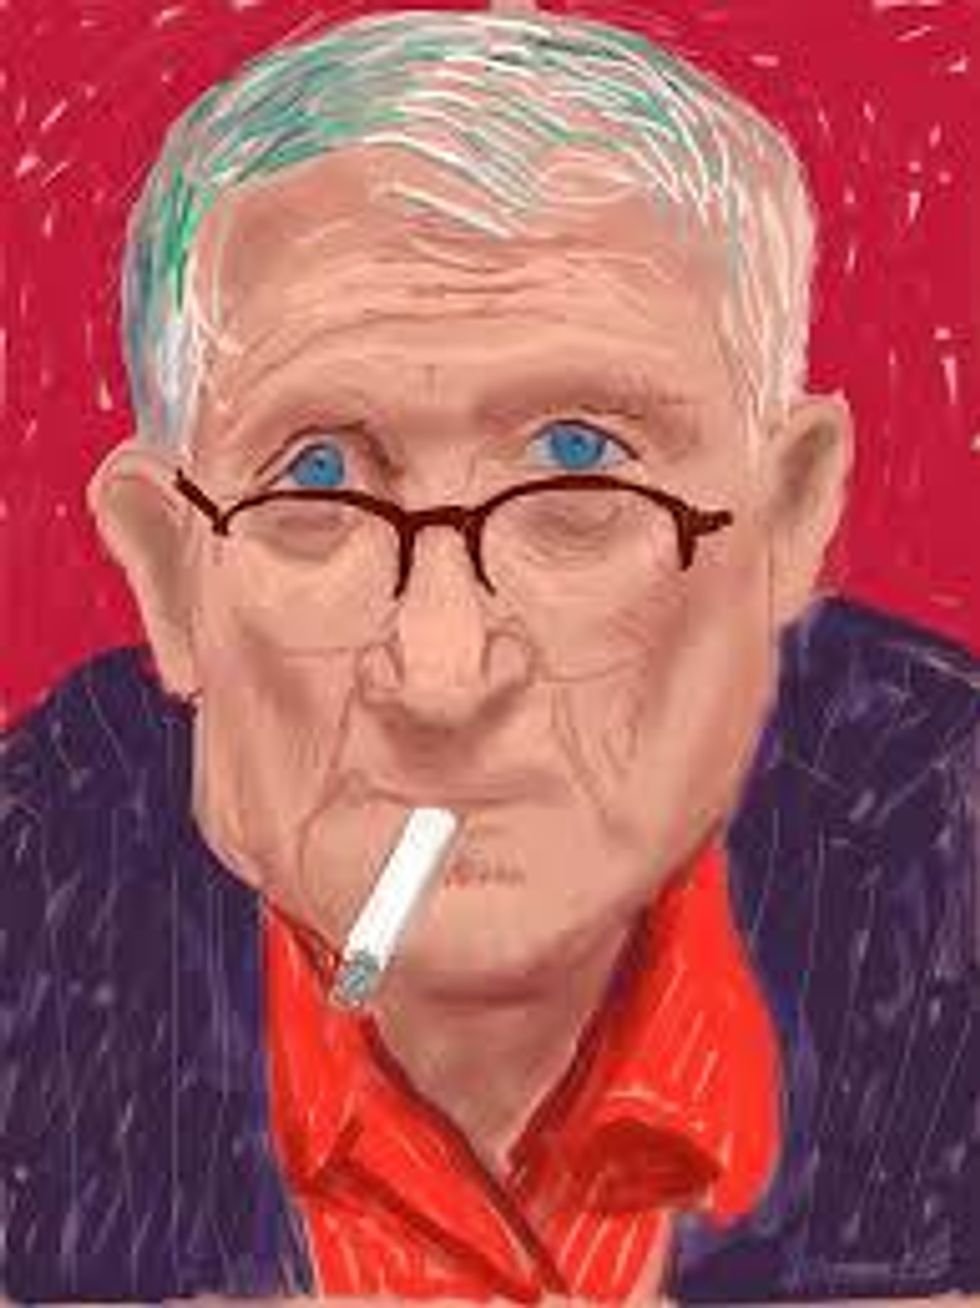 9 Of Hockney's Works That Jumped Out During Finals